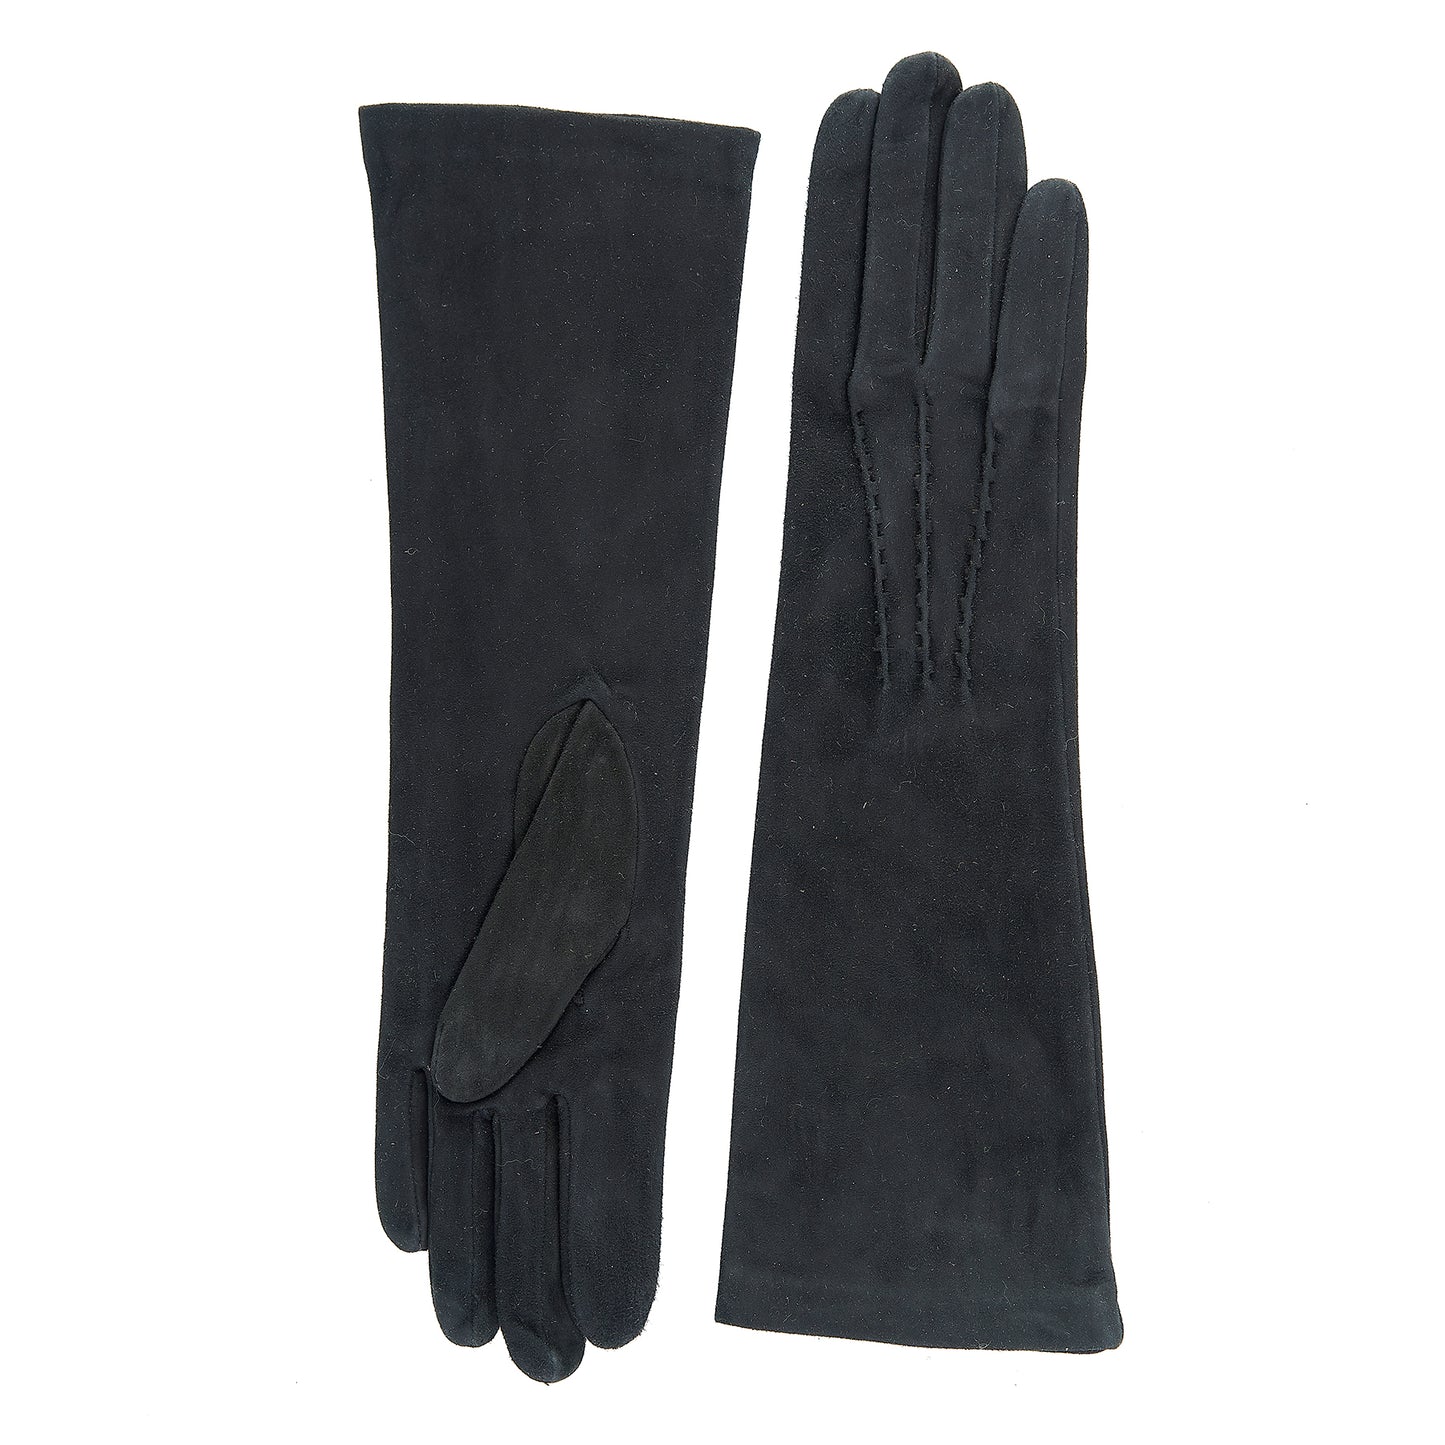 Women’s basic black soft suede leather gloves 6 BT and cashmere lining